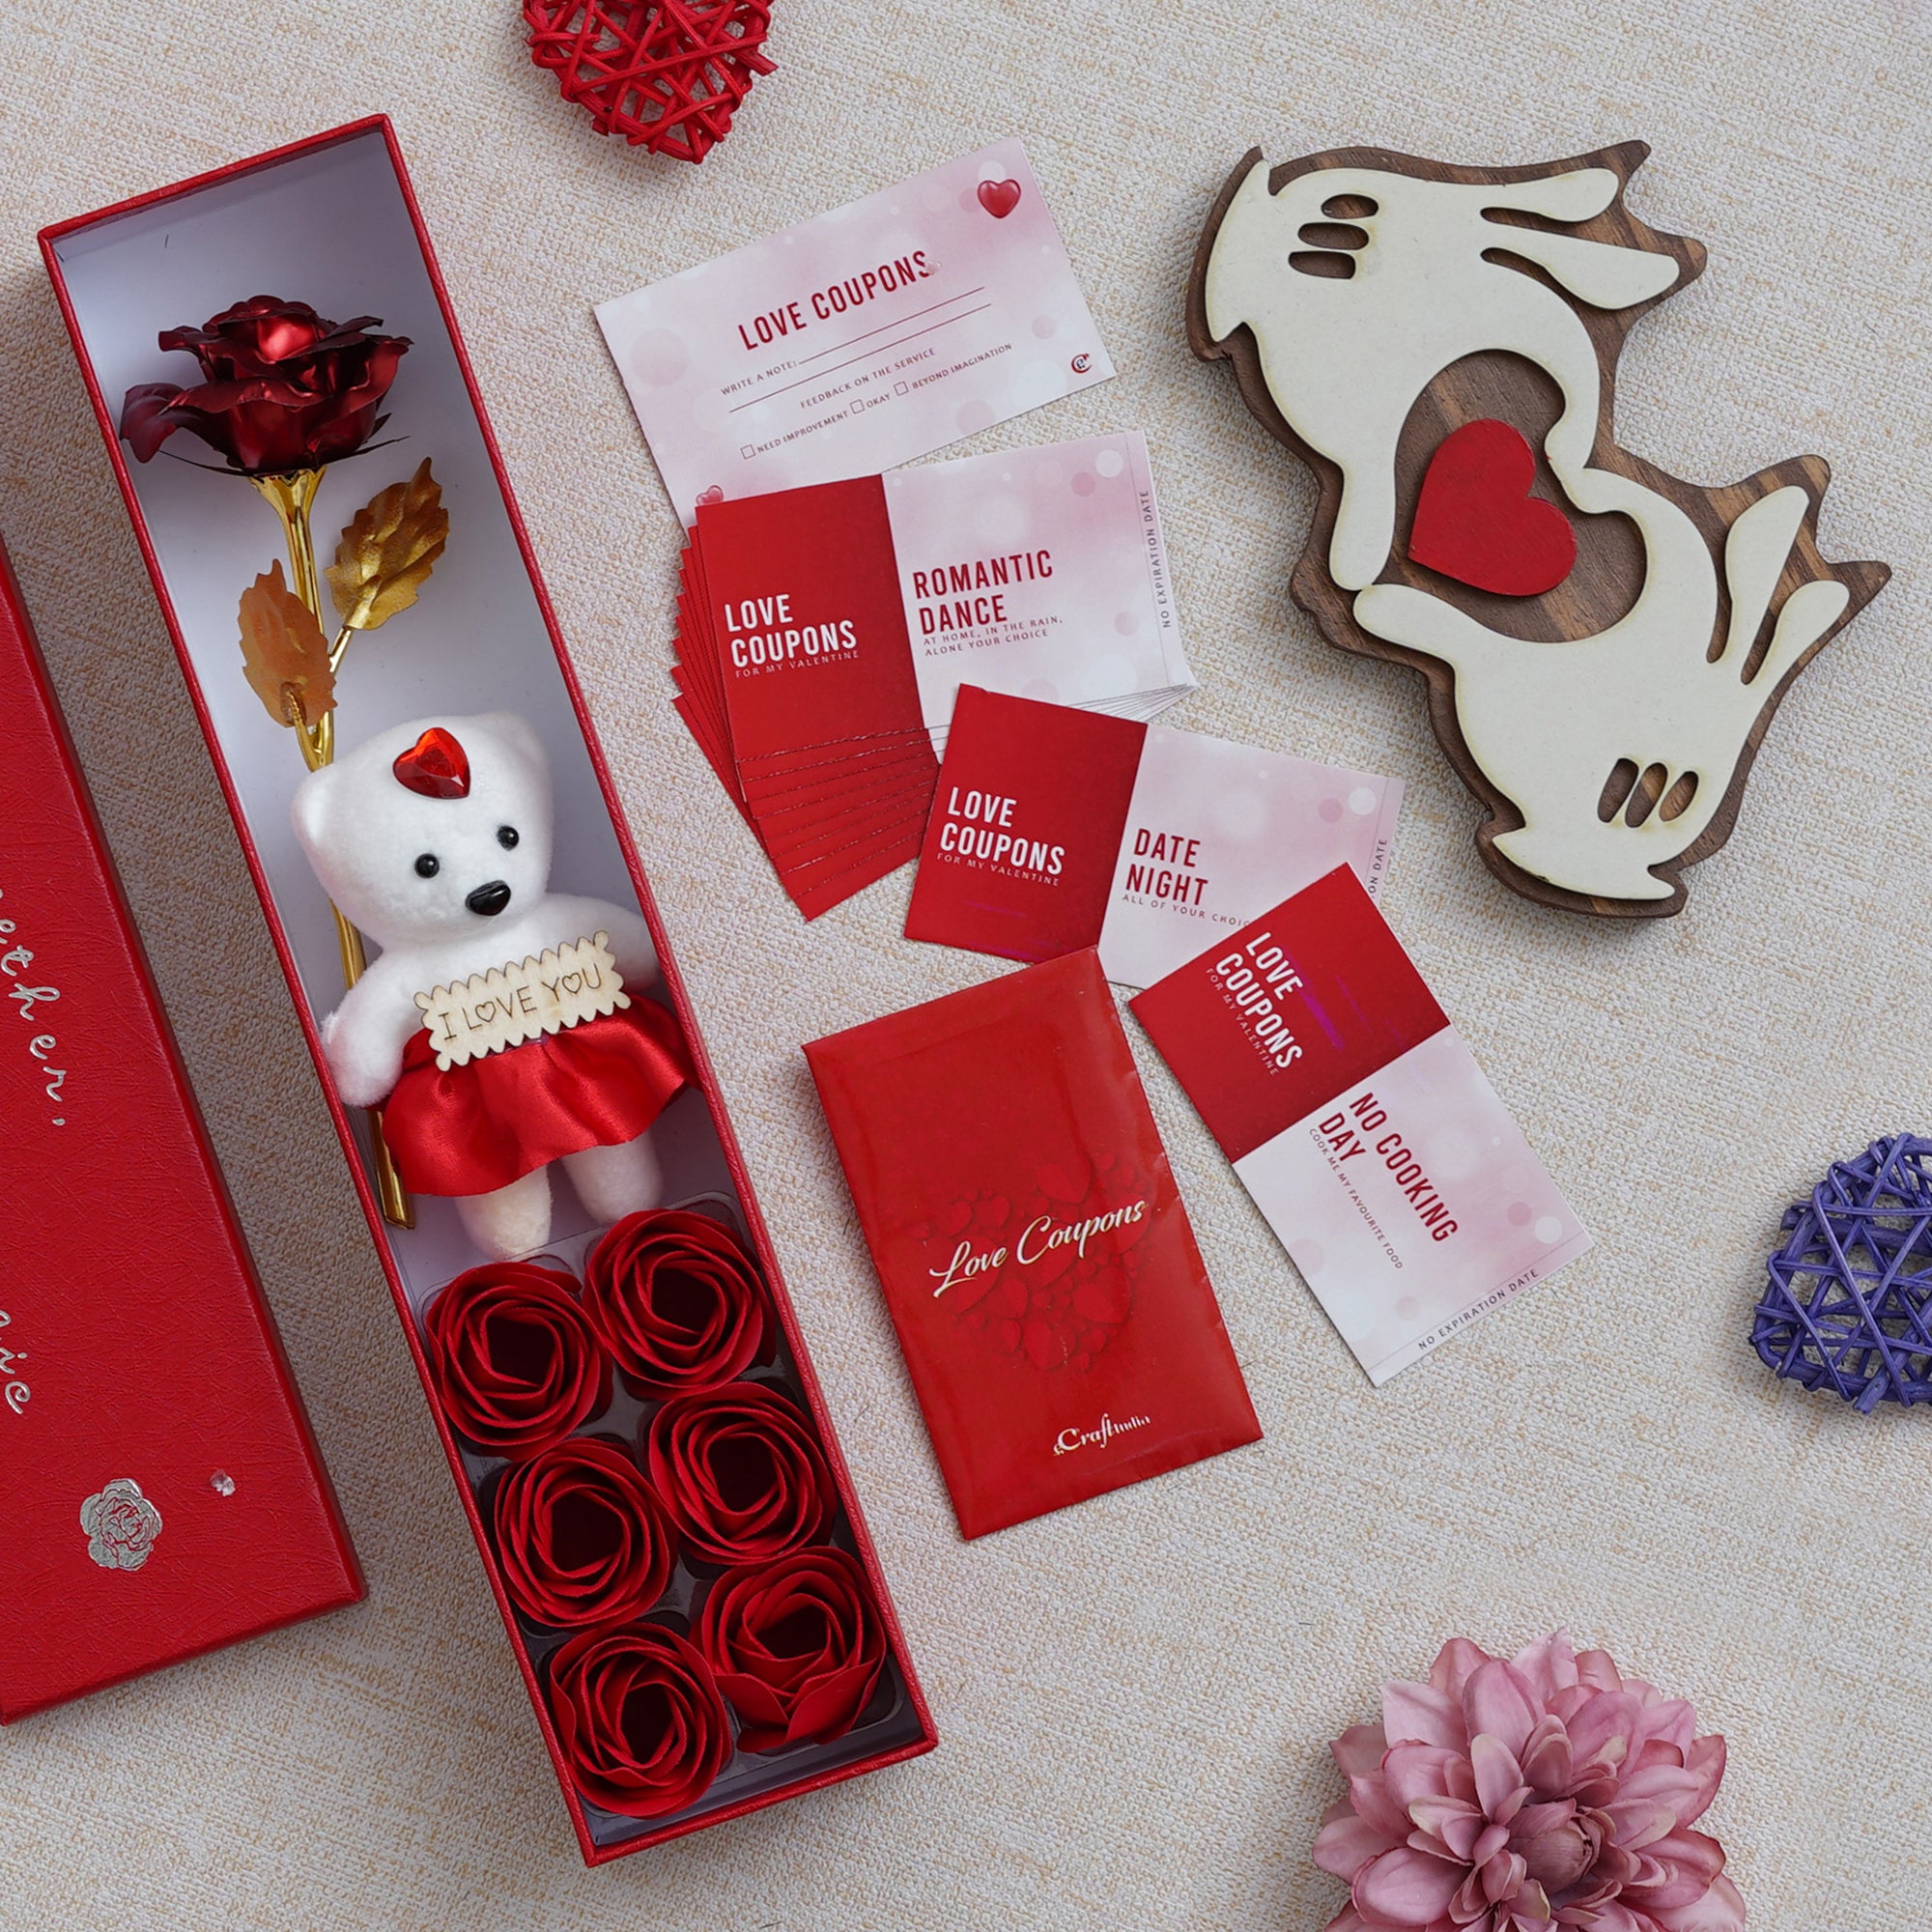 Valentine Combo of Pack of 12 Love Coupons Gift Cards Set, Red Gift Box with Teddy & Roses, Hands Showcasing Red Heart Gift Set